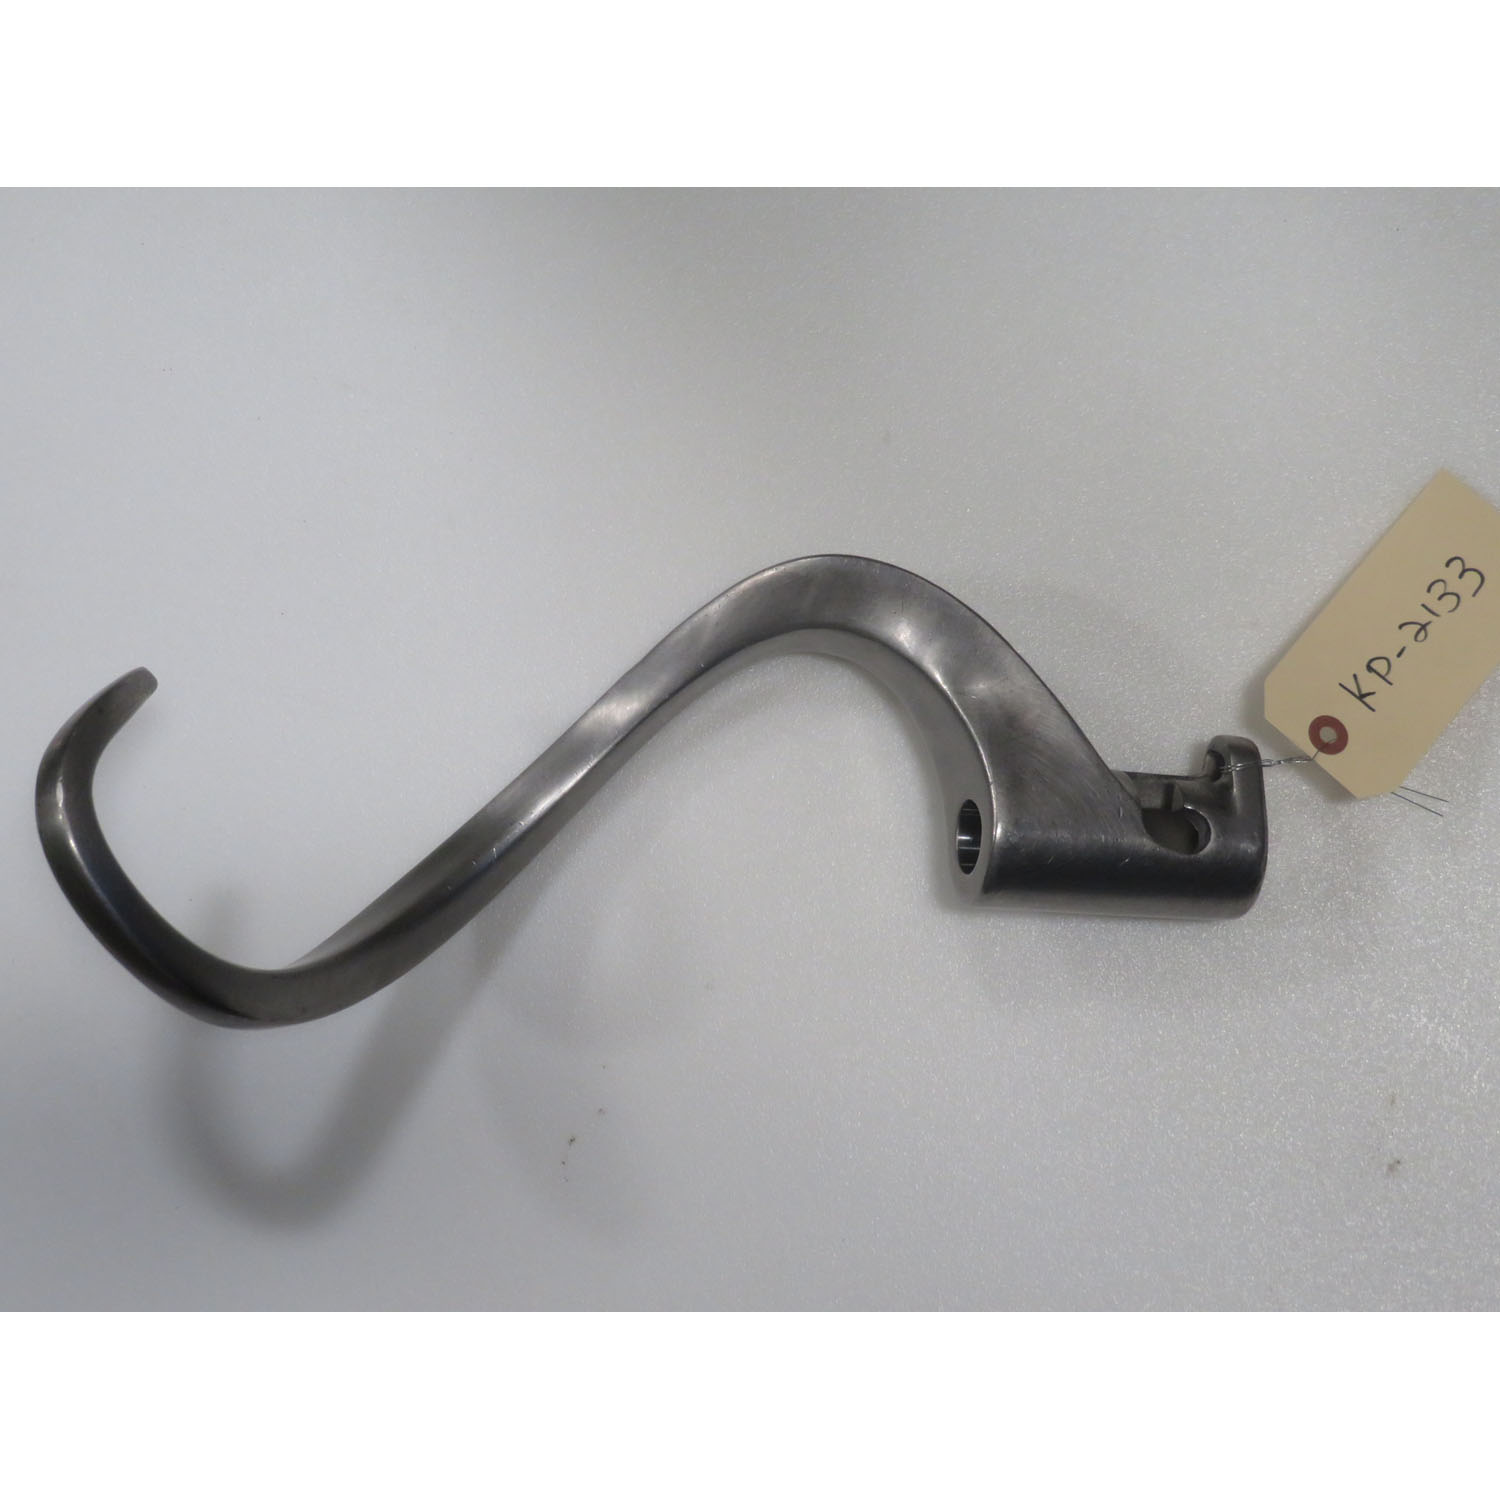 Hobart D30EDST 30 Quart Hook Stainless Steel, Used Excellent Condition image 1